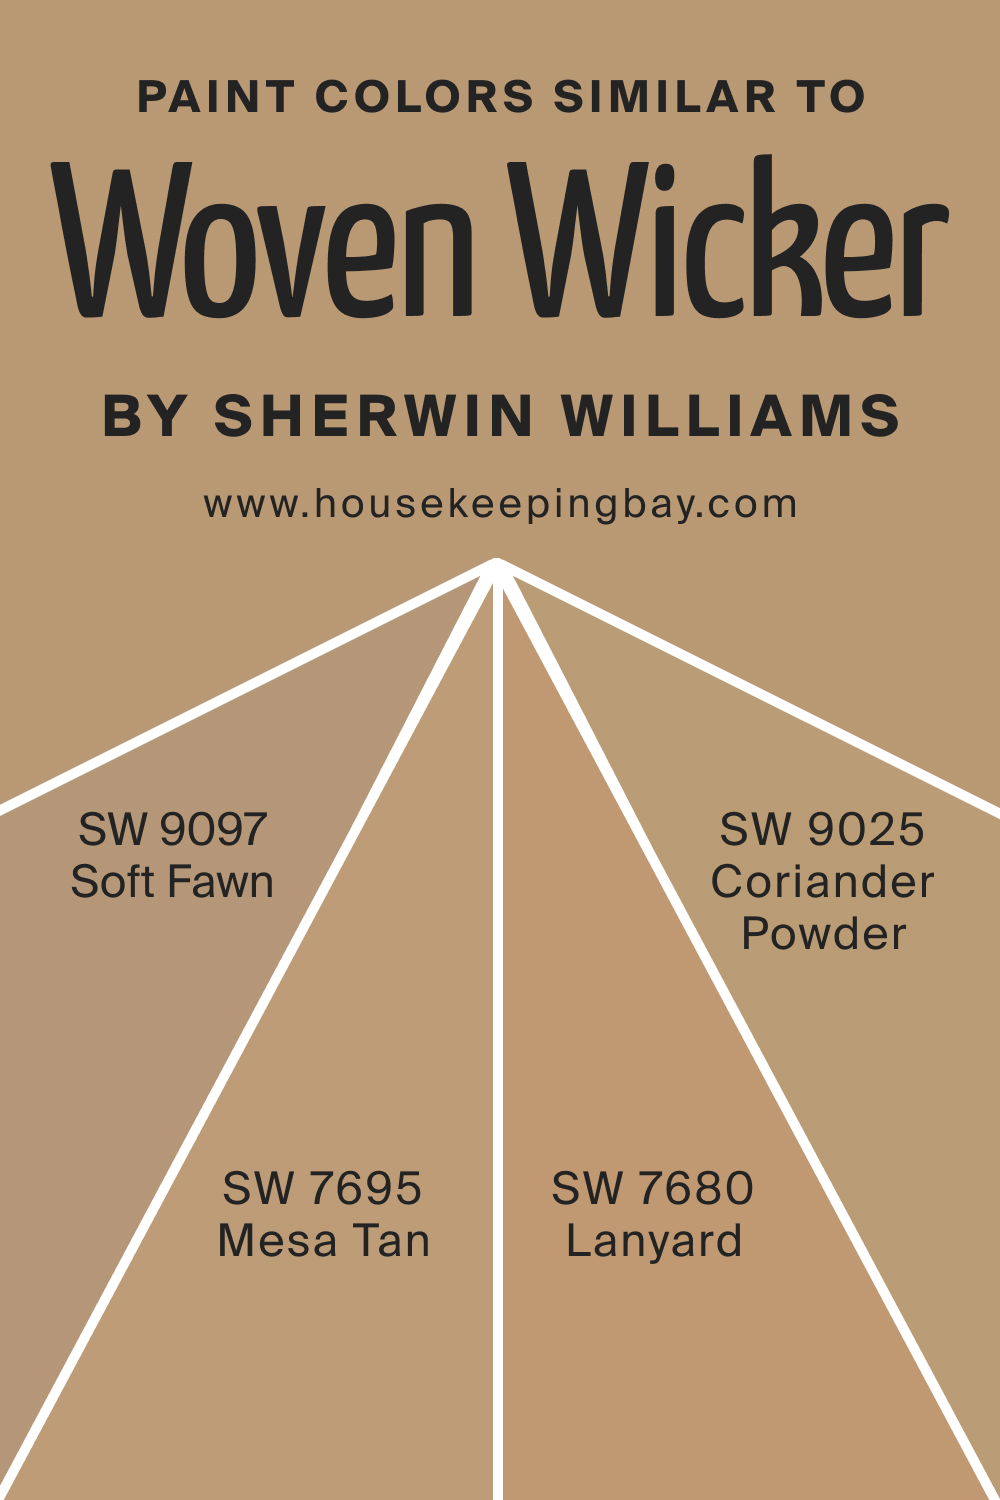 Paint Color Similar to SW 9104 Woven Wicker by Sherwin Williams